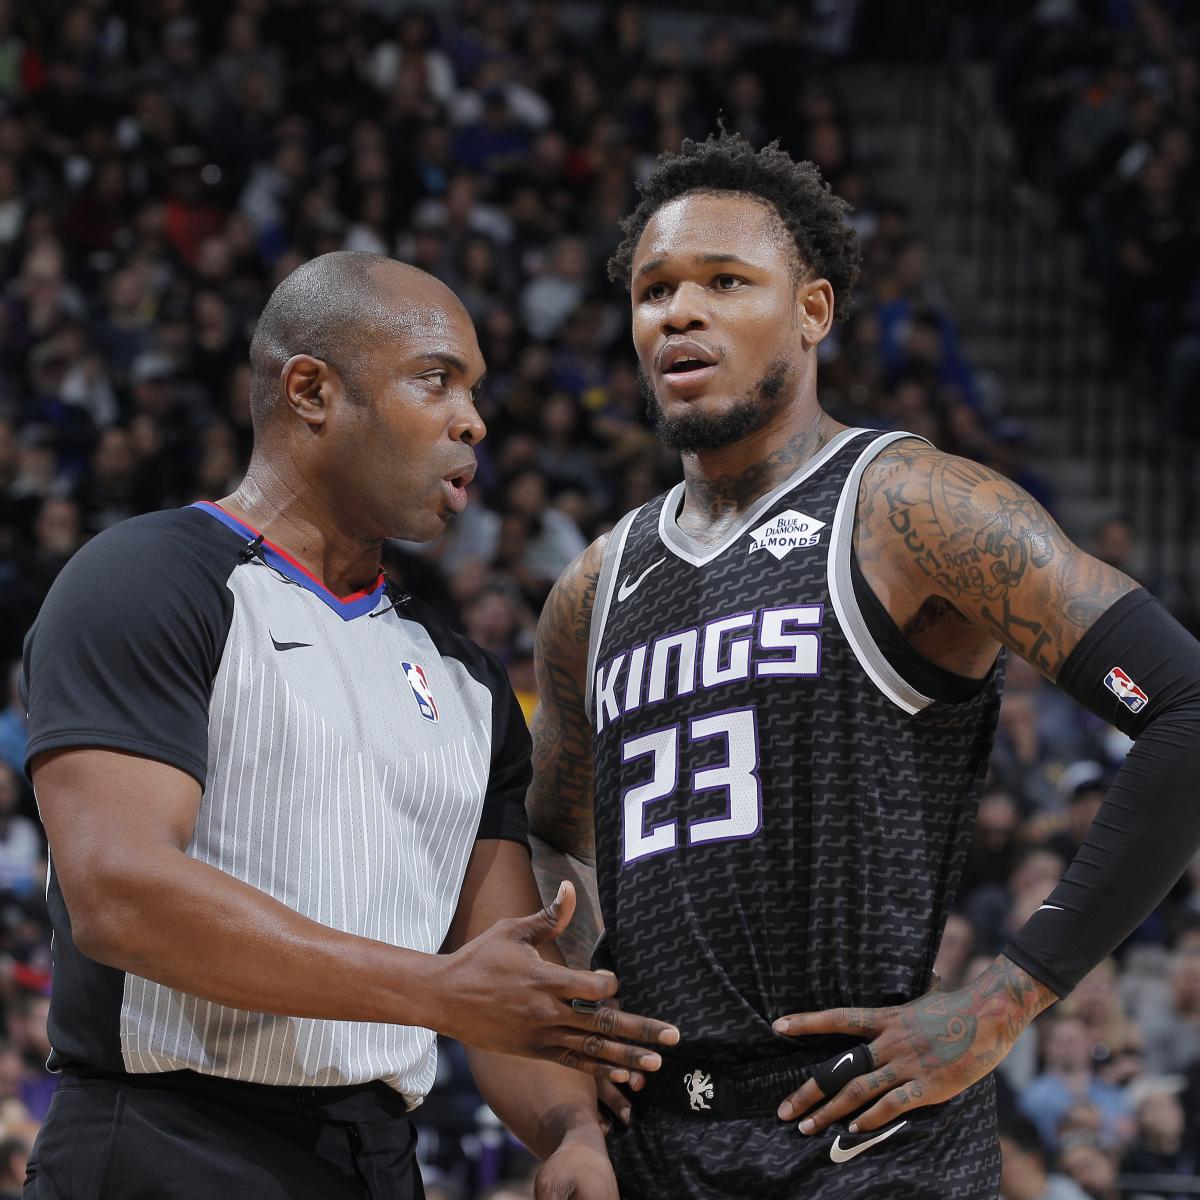 Ben Mclemore Rockets Agree To Reported 2 Year Contract With Partial Guarantees Bleacher Report Latest News Videos And Highlights